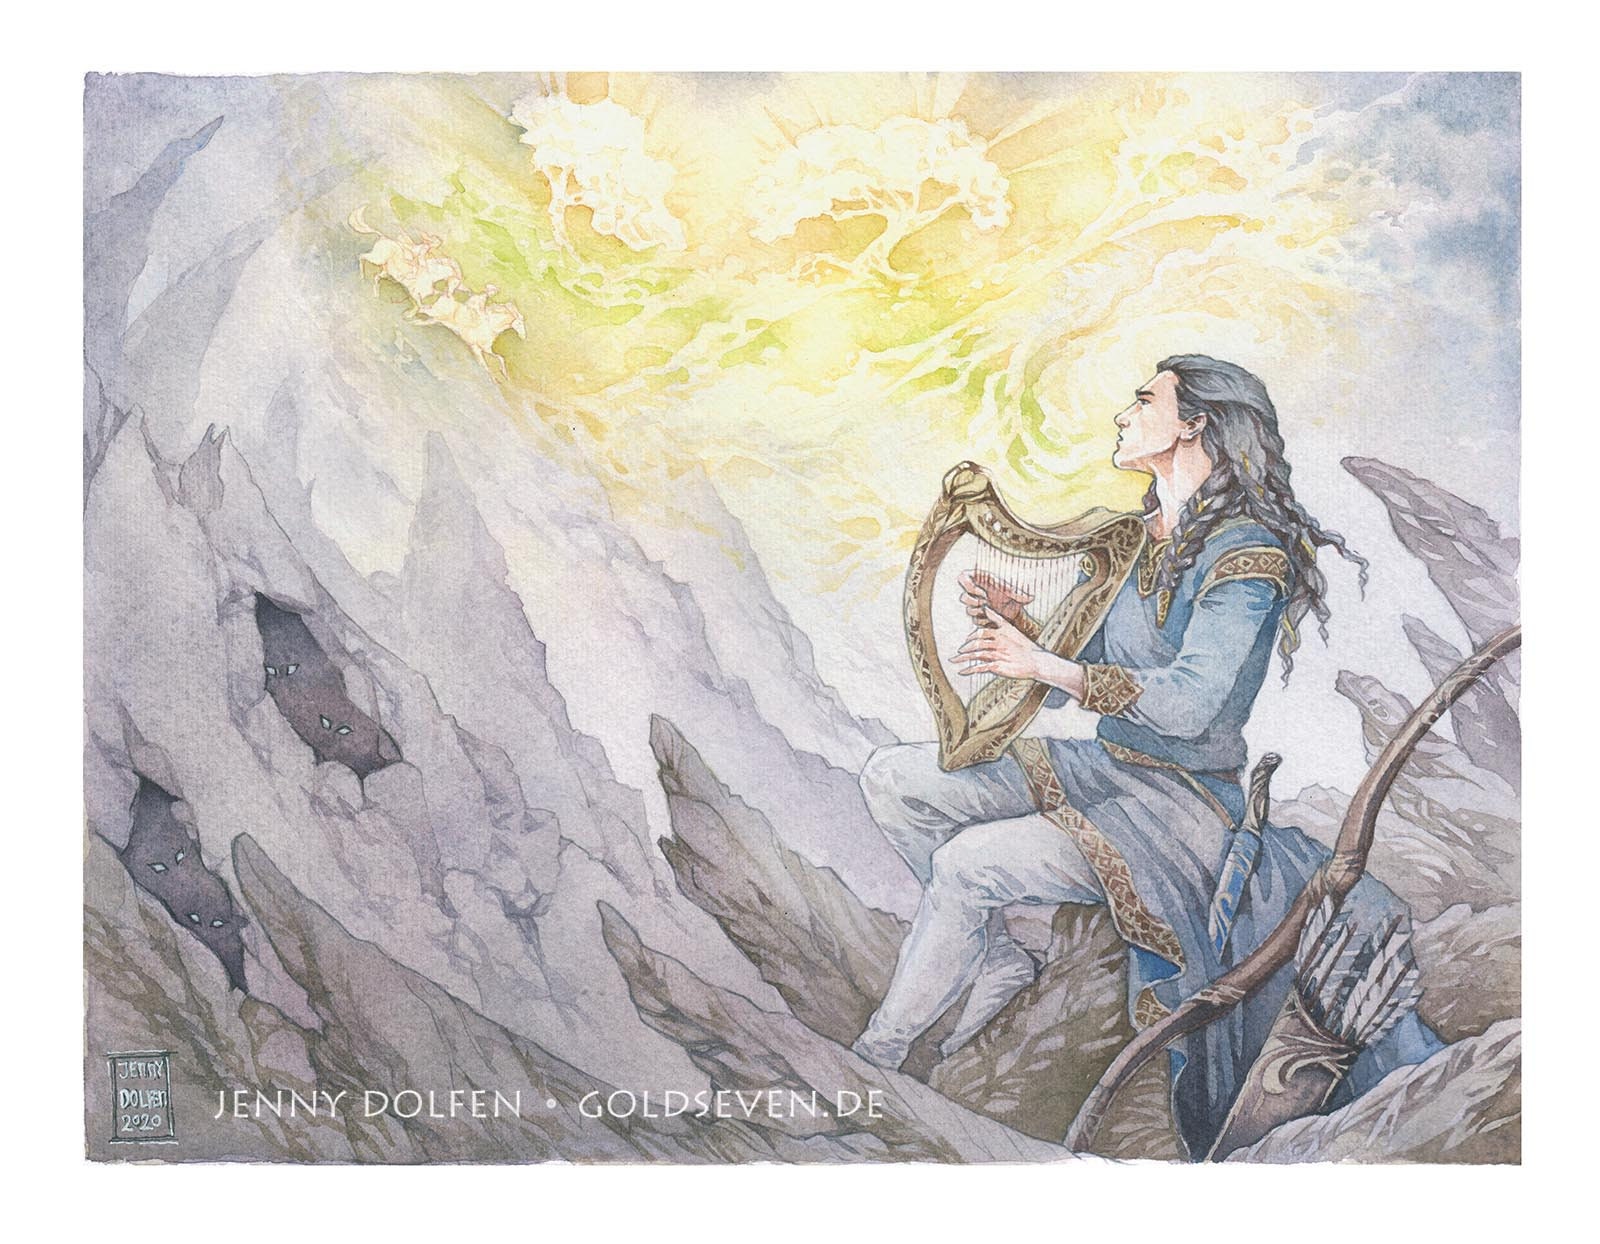 He Song of Signed Giclée Print Etsy